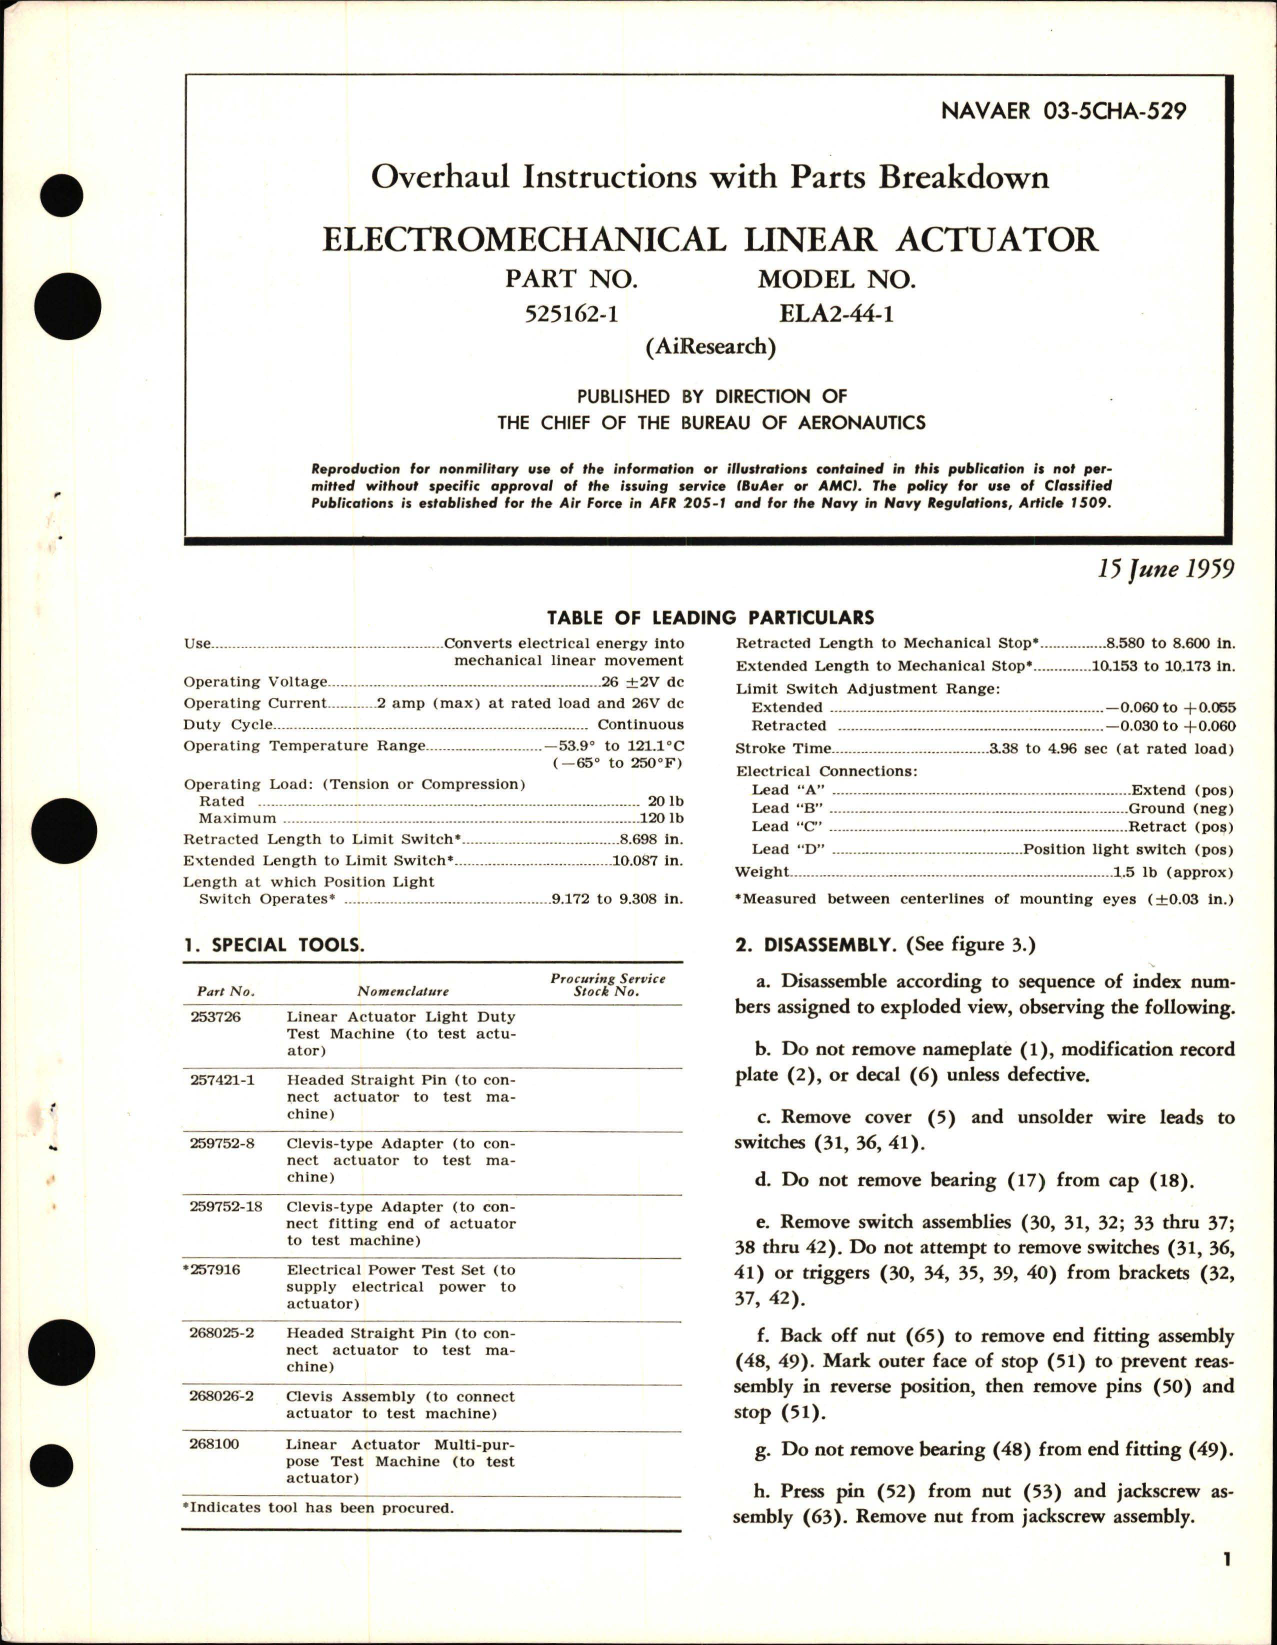 Sample page 1 from AirCorps Library document: Overhaul Instructions with Parts Breakdown for Electromechanical Linear Actuator - Part 525162-1 - Model ELA2-44-1